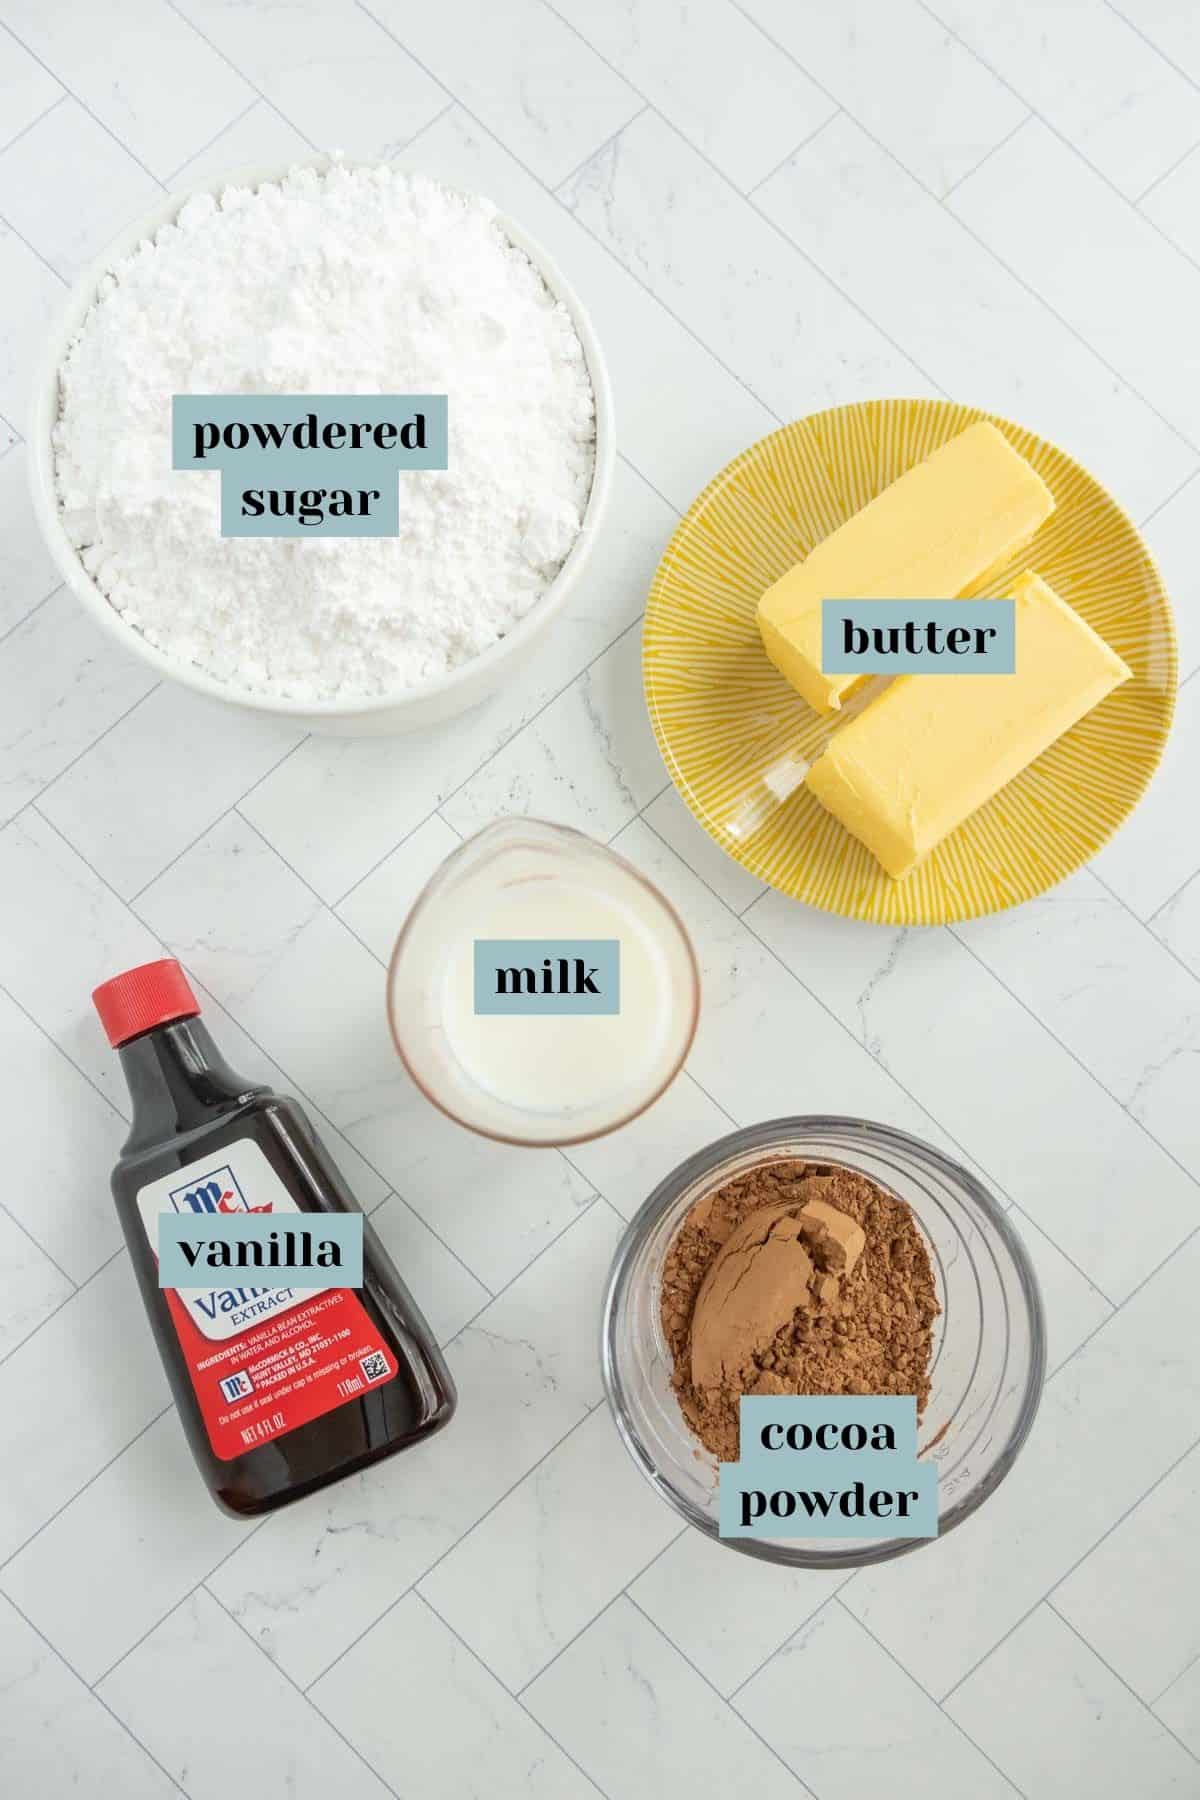 Ingredients for a recipe laid out on a surface: a bowl of powdered sugar, a small bowl of cocoa powder, two sticks of butter on a yellow plate, a bottle of vanilla extract, and a glass of milk.